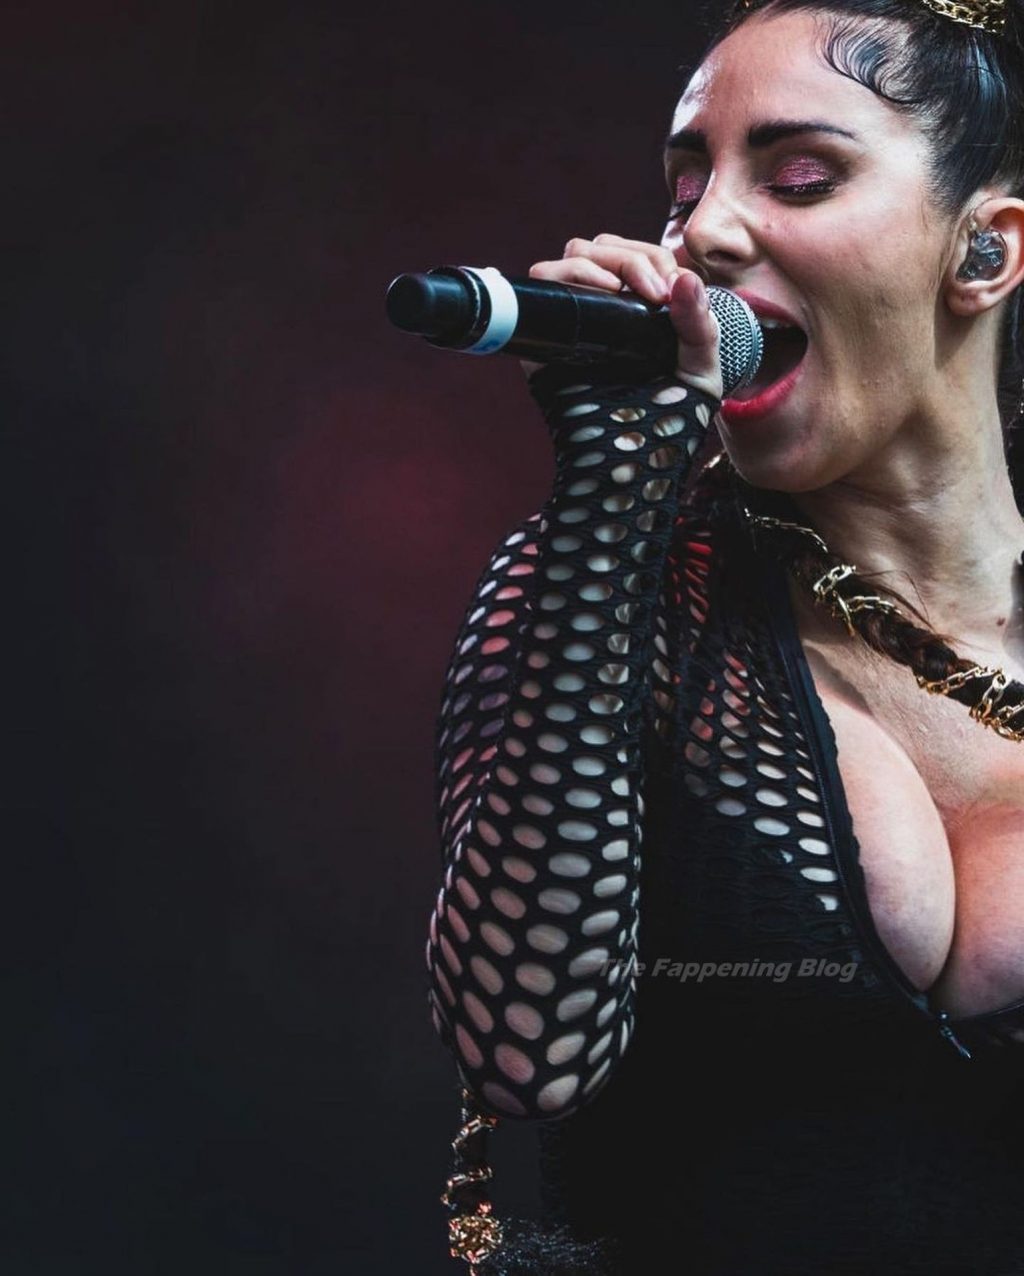 Mala Rodriguez Performs on Stage in Madrid (13 Photos + Video)